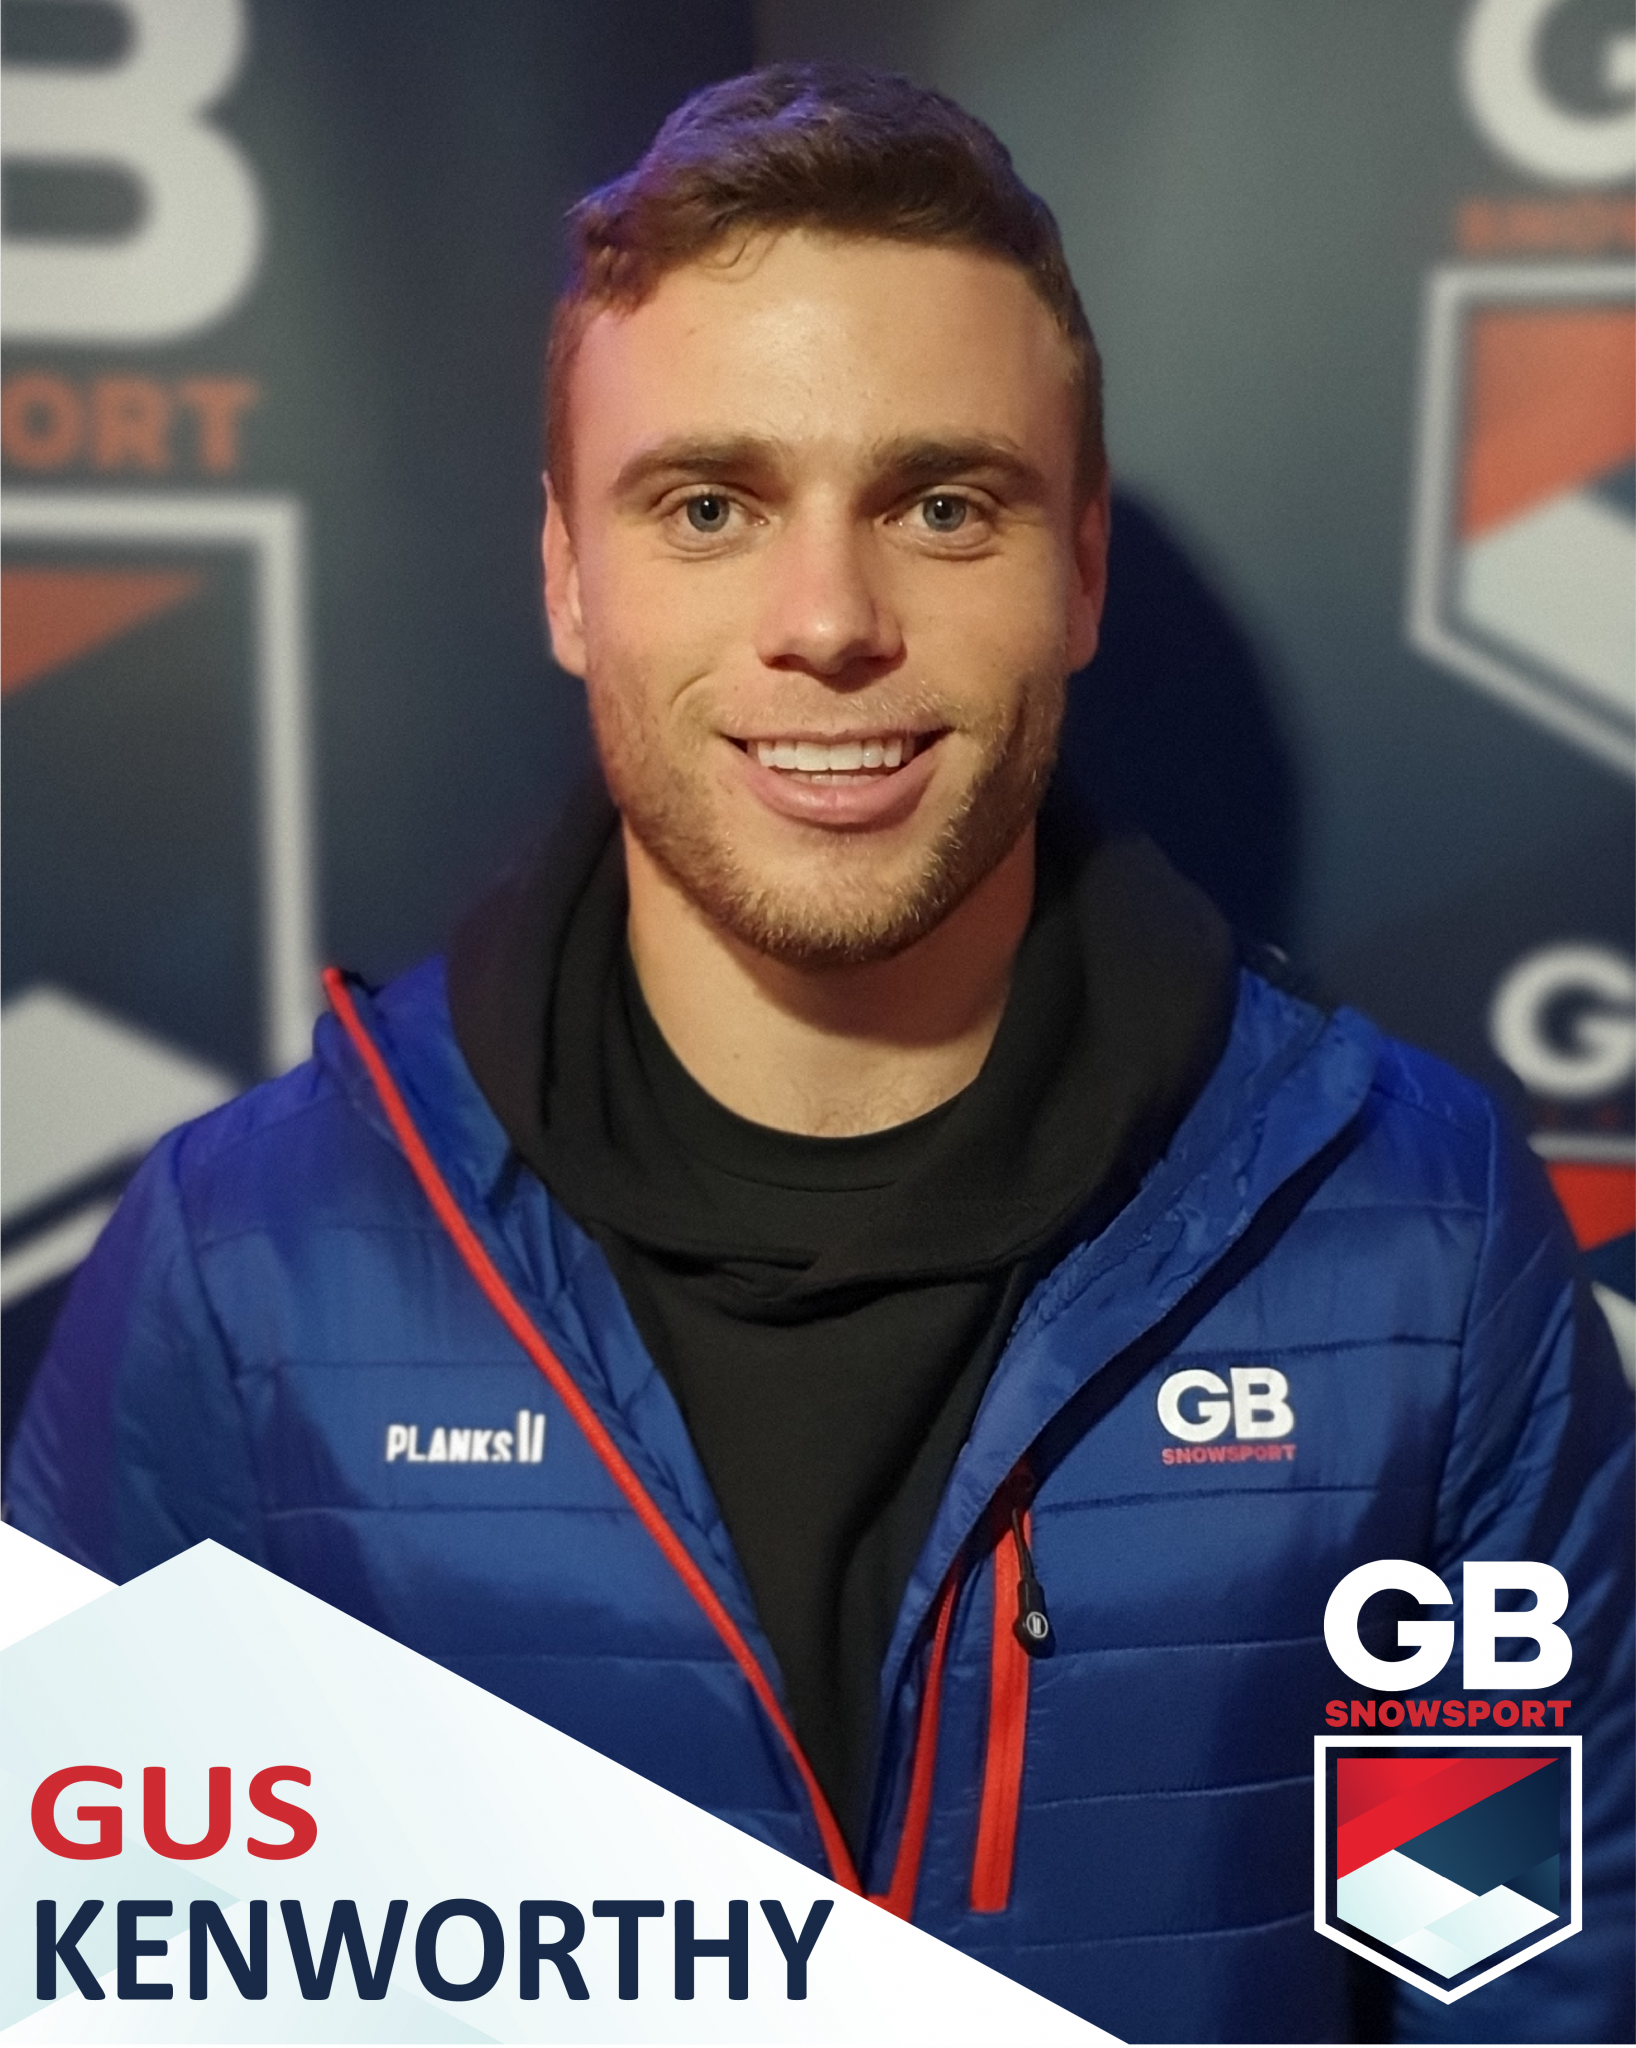 Freestyle skier Gus Kenworthy is targeting success for Great Britain ©GB Snowsport